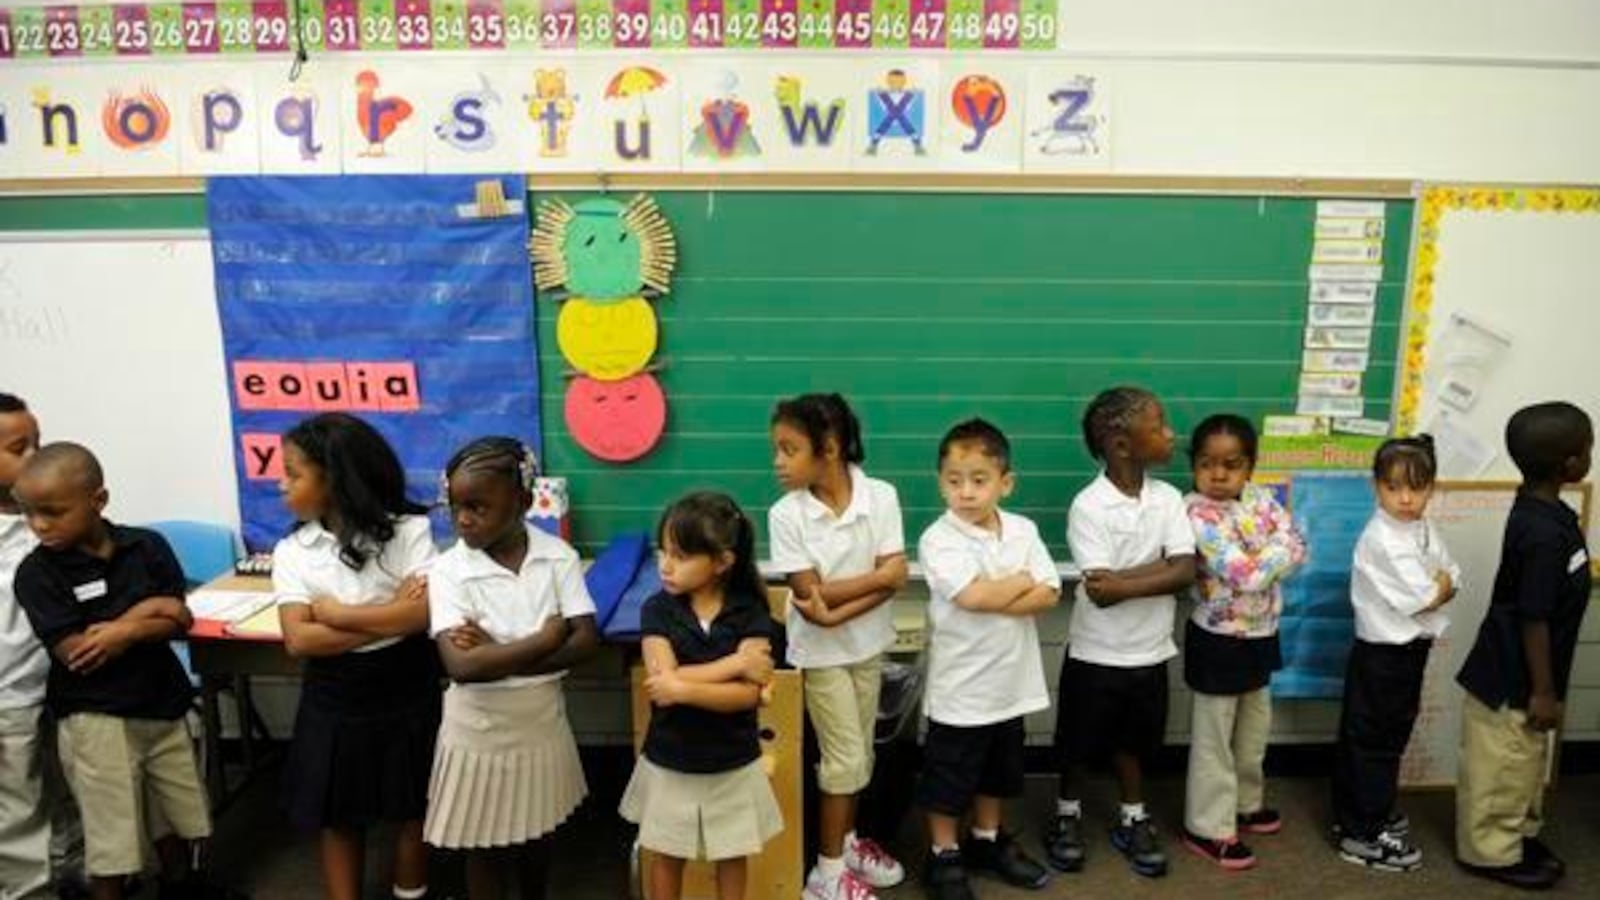 Kindergarten students line up on the first day of school in 2012 at Whittier K-8 School in Denver. (Photo by RJ Sangosti, The Denver Post)